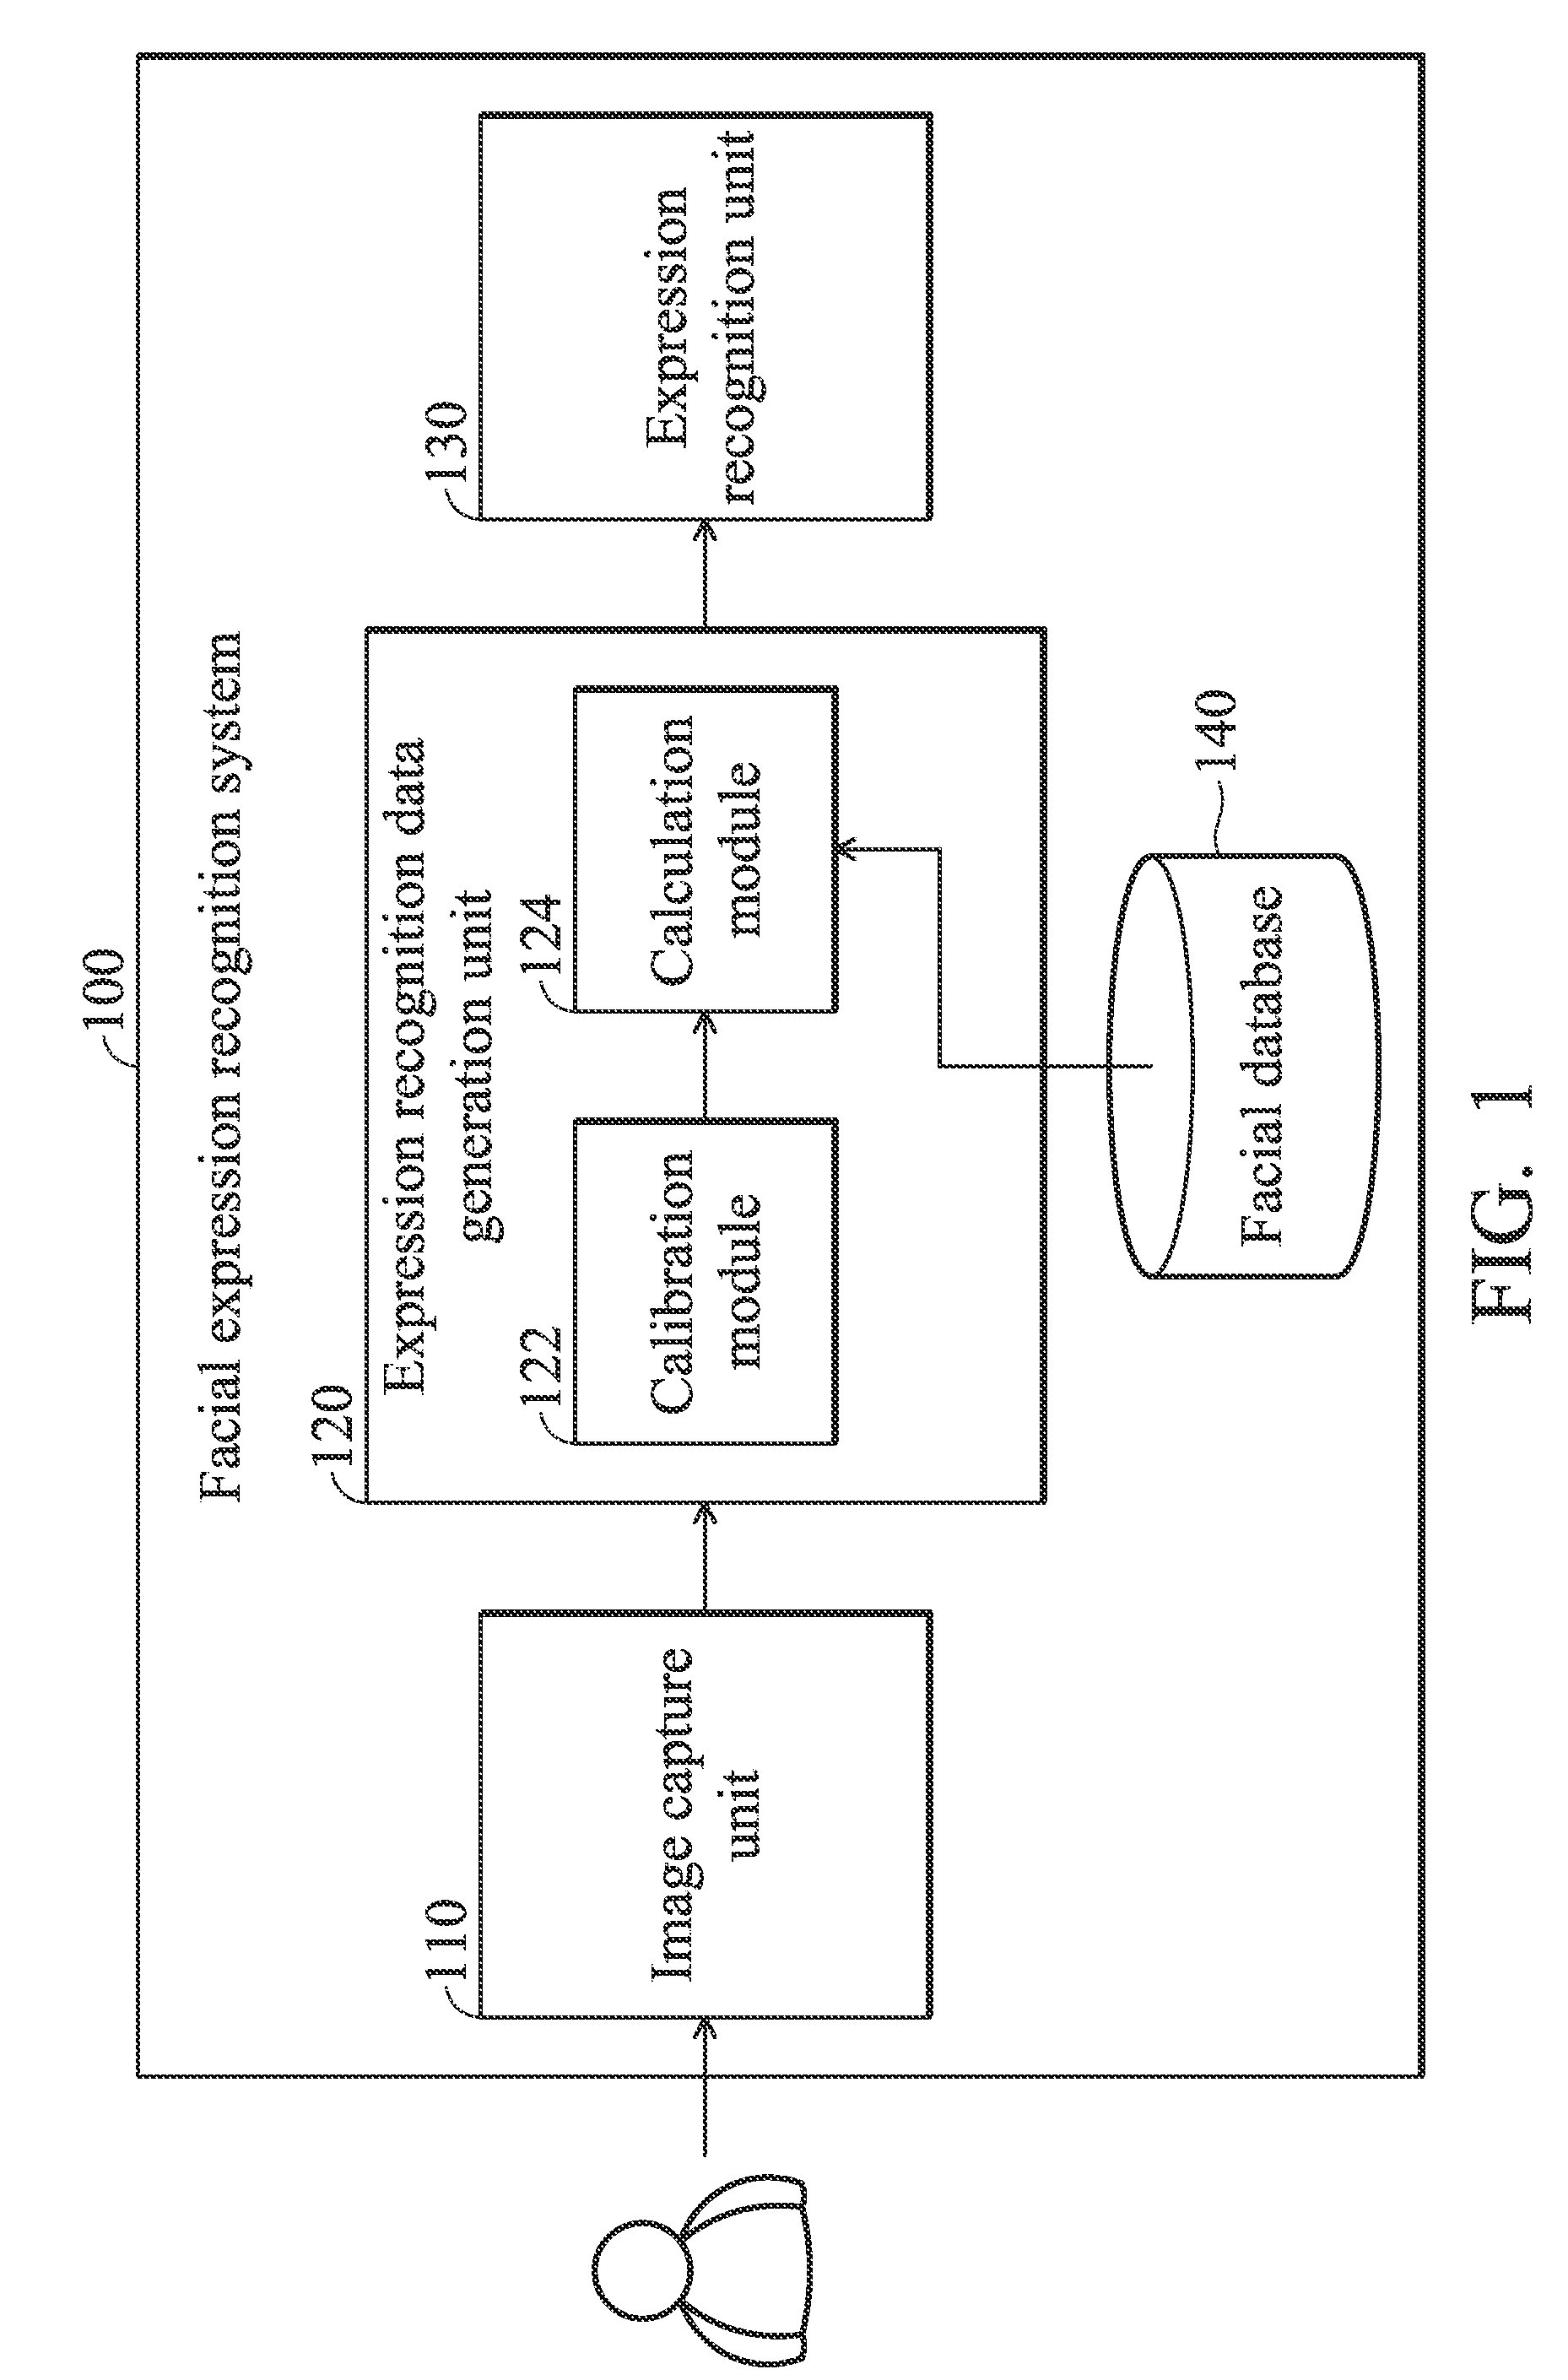 Facial expression recognition systems and methods and computer program products thereof